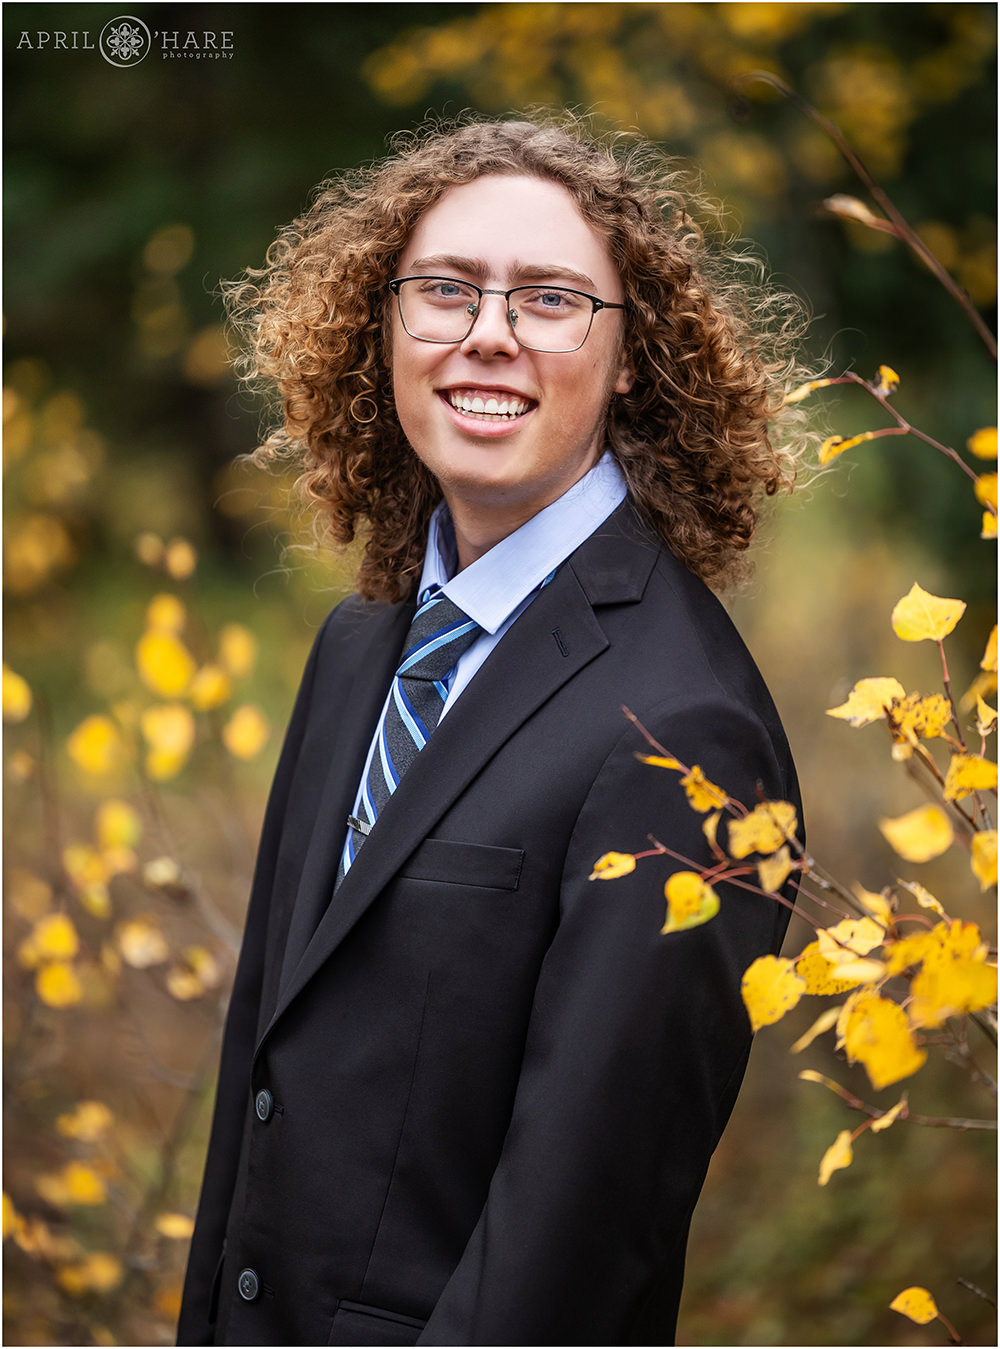 Senior boy with curly hair wearing a black suit stands in the fall color in Evergreen CO